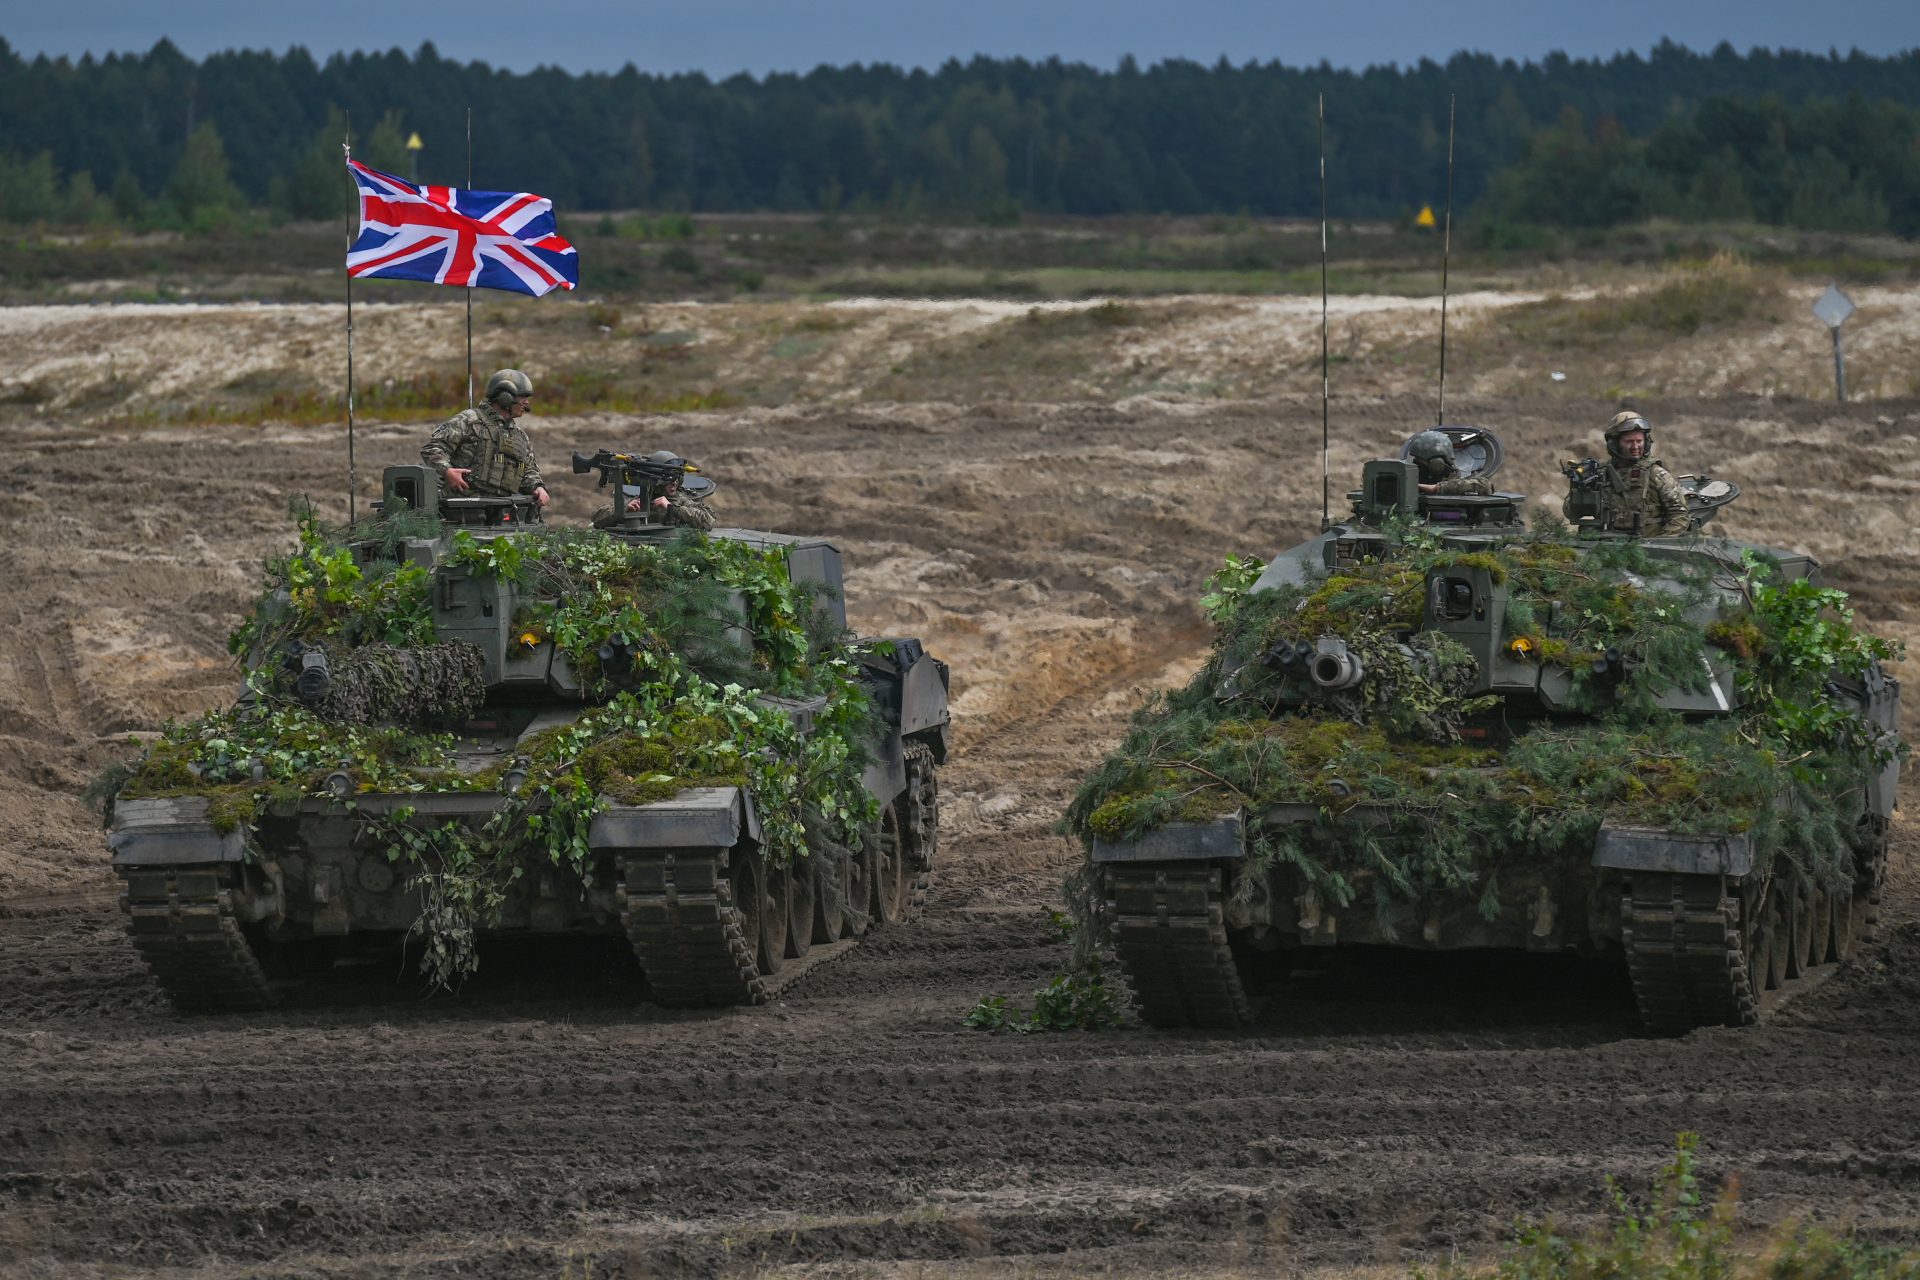 The United Kingdom has no plans to send troops